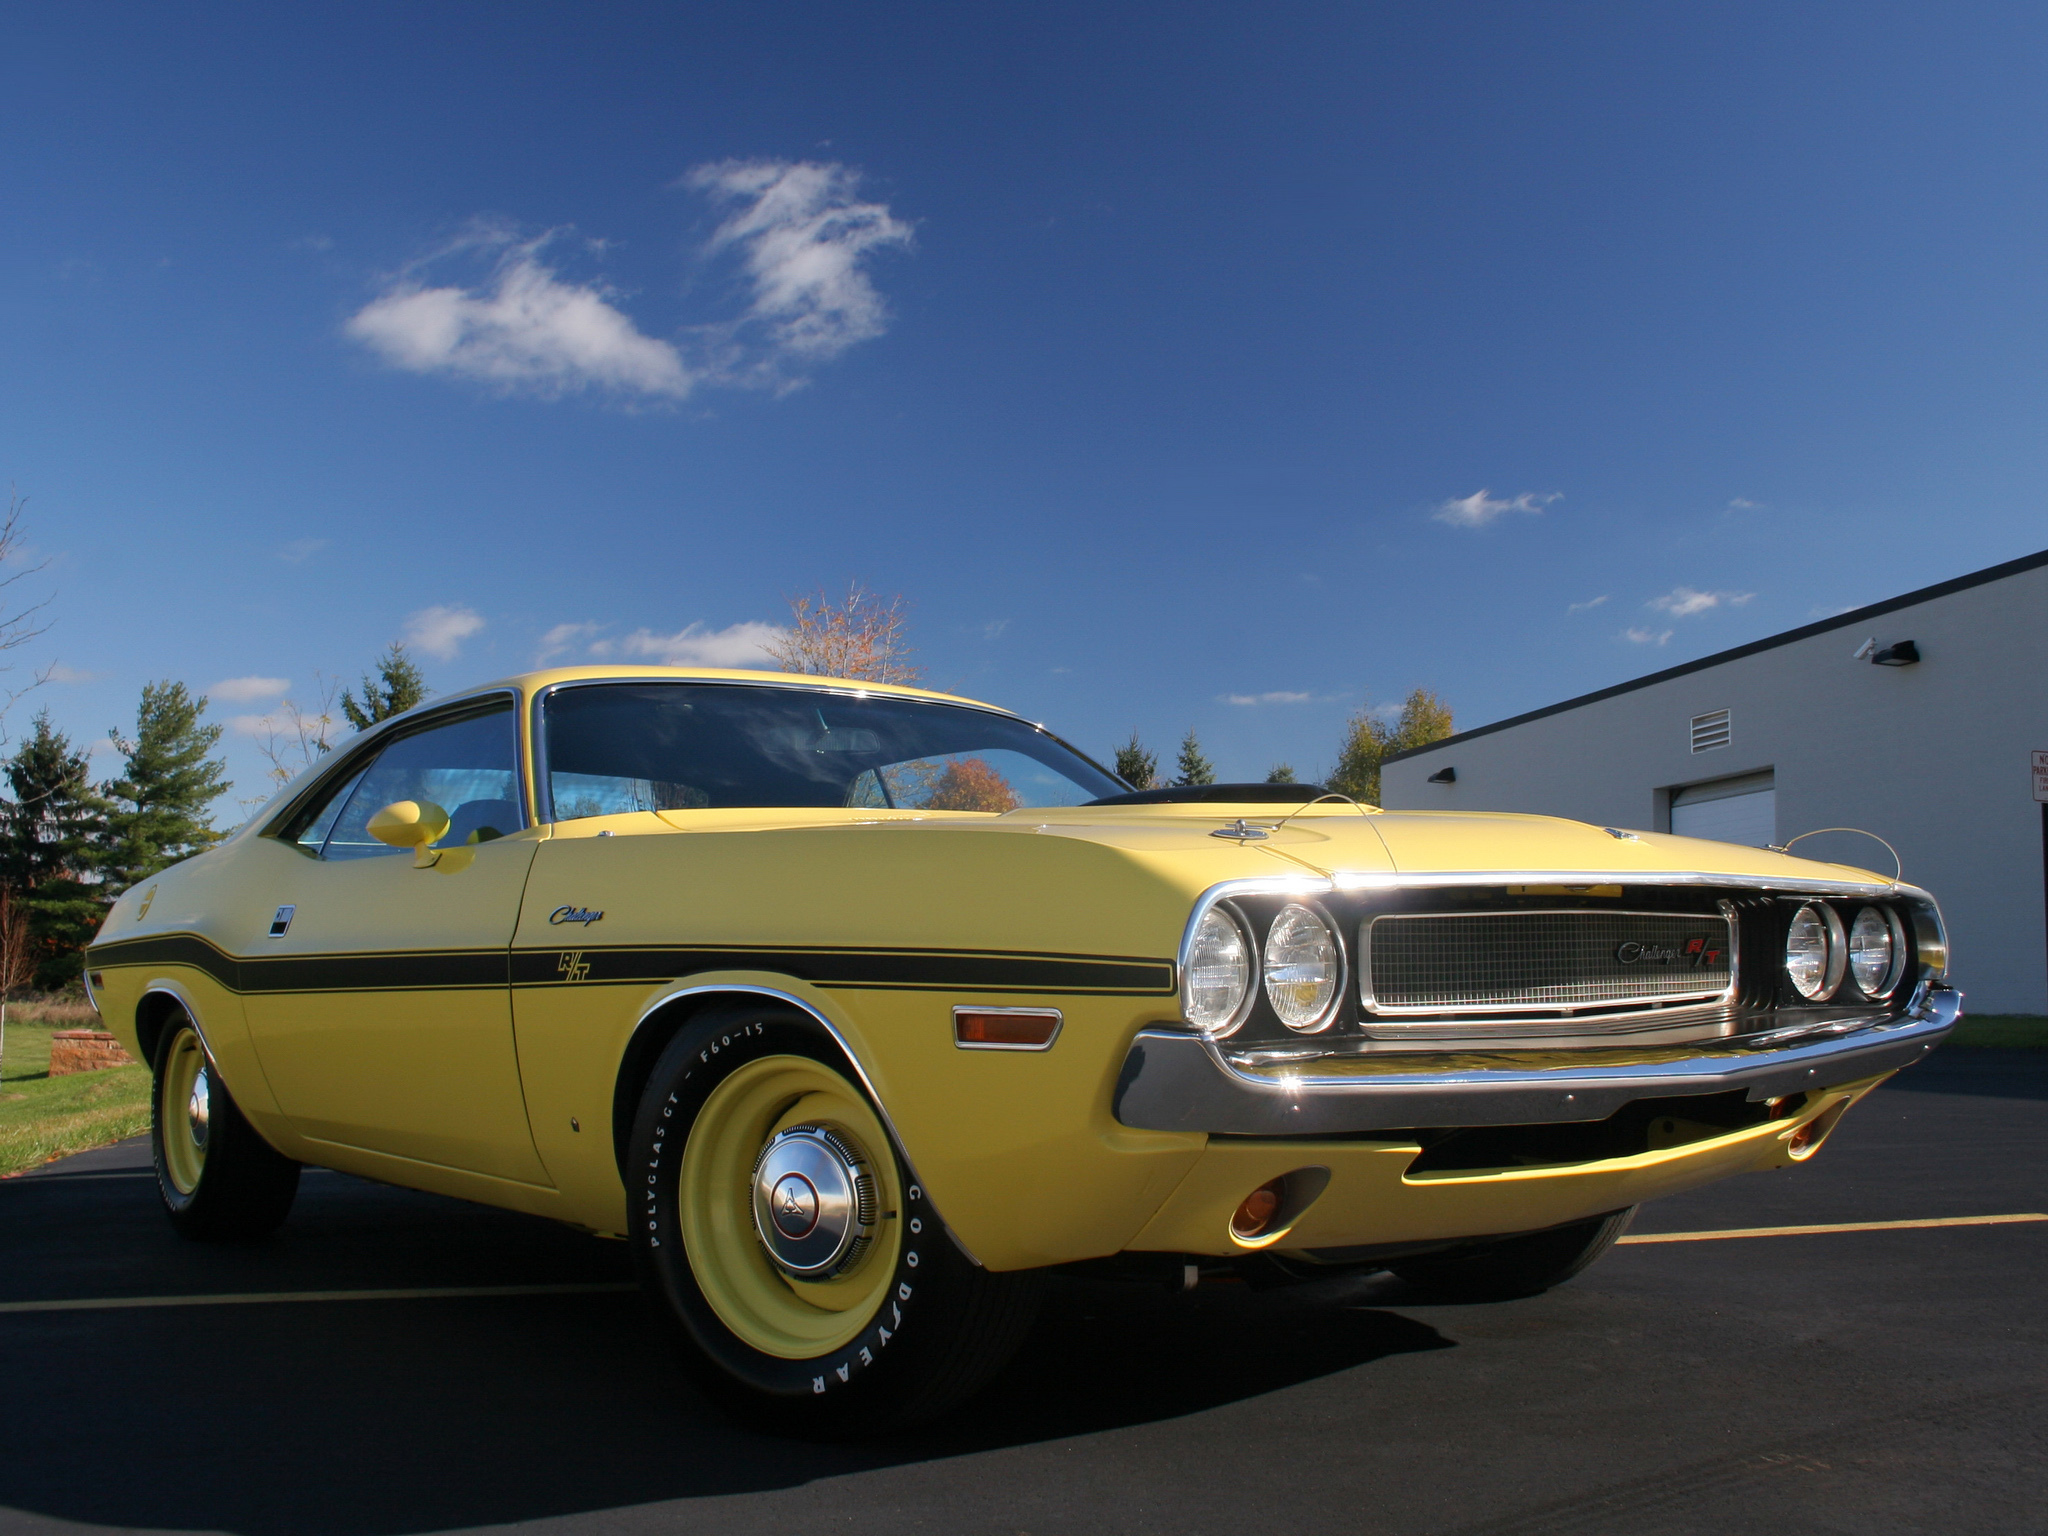 Mobile HD Wallpaper Dodge challenger, yellow, cars, side view